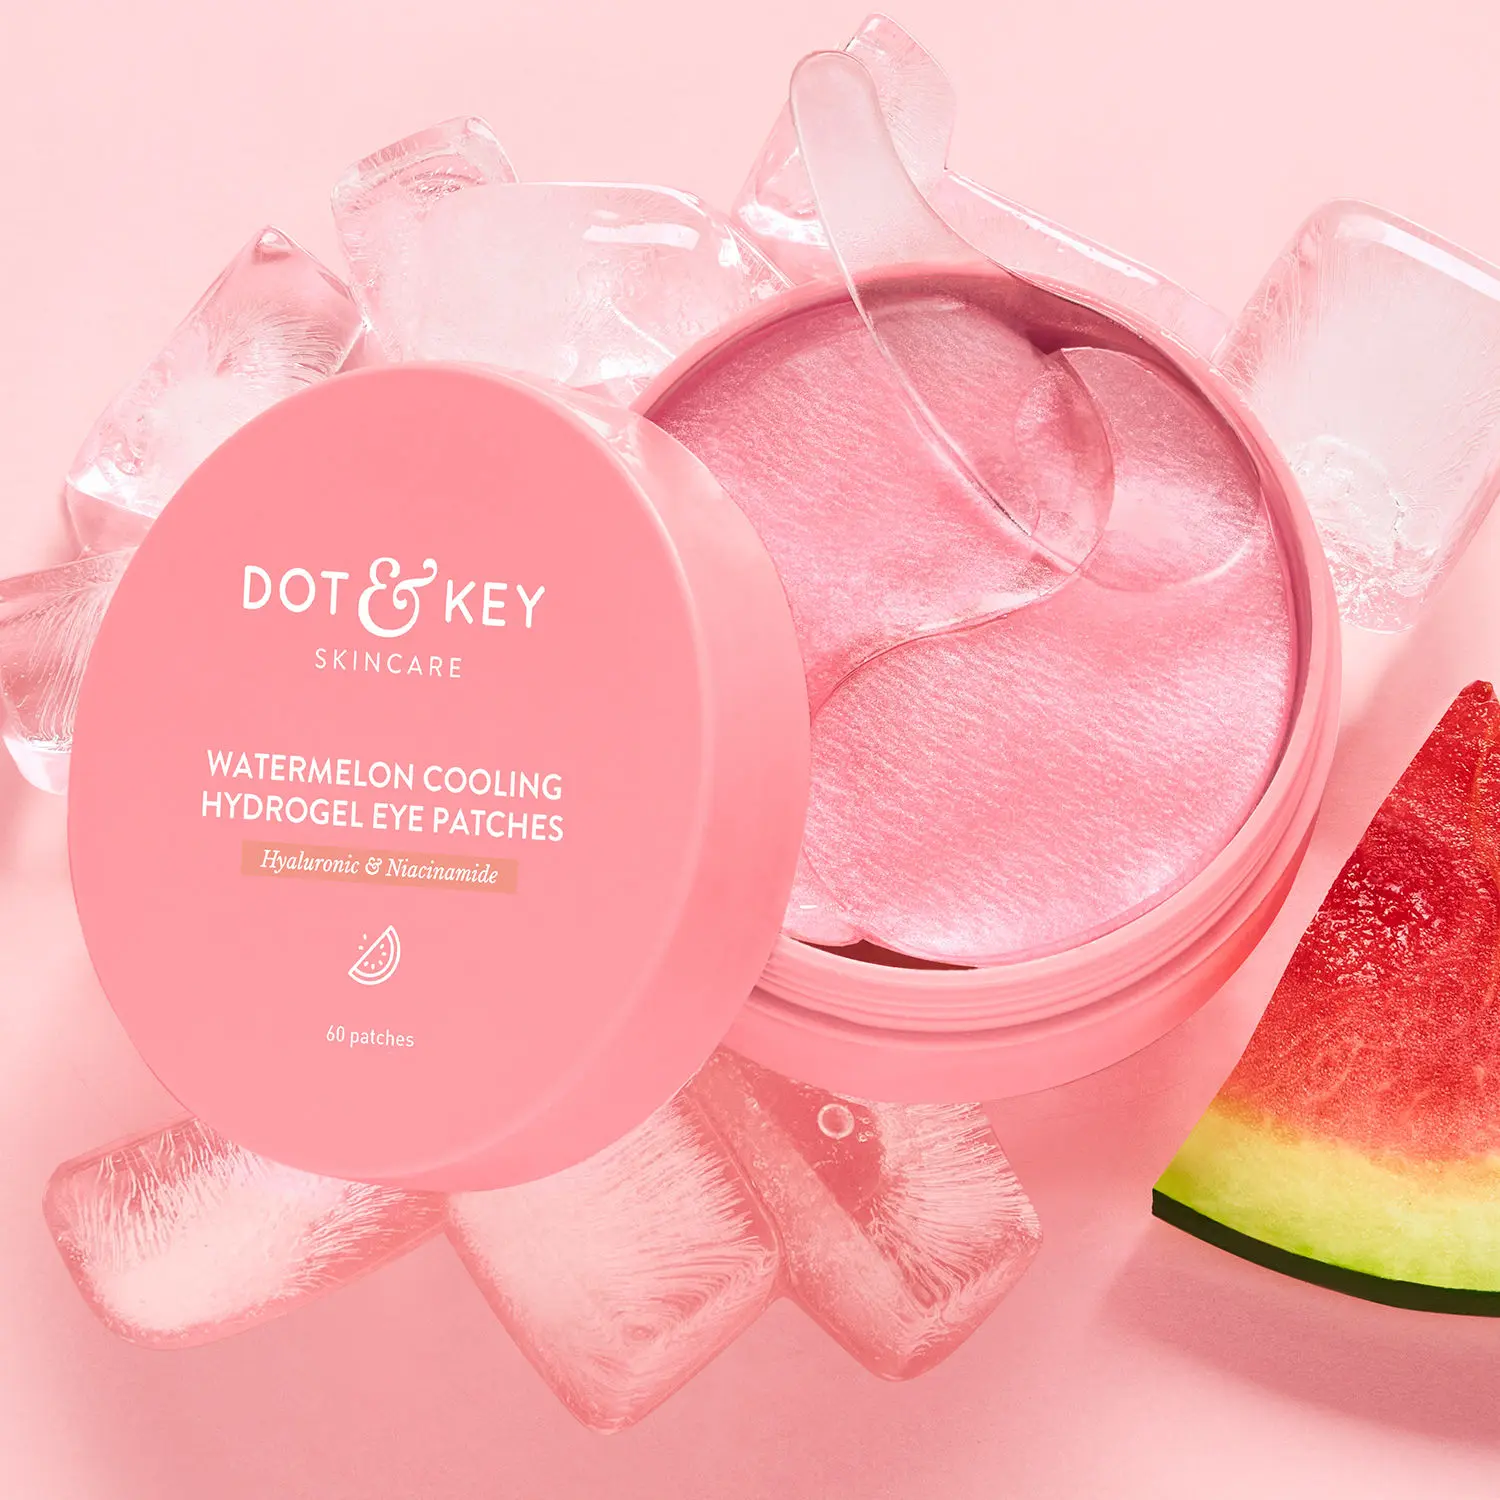 Dot & Key Watermelon Cooling Hydrogel Eye Patches with Hyaluronic & Niacinamide - 60 Patches | For All Skin Types